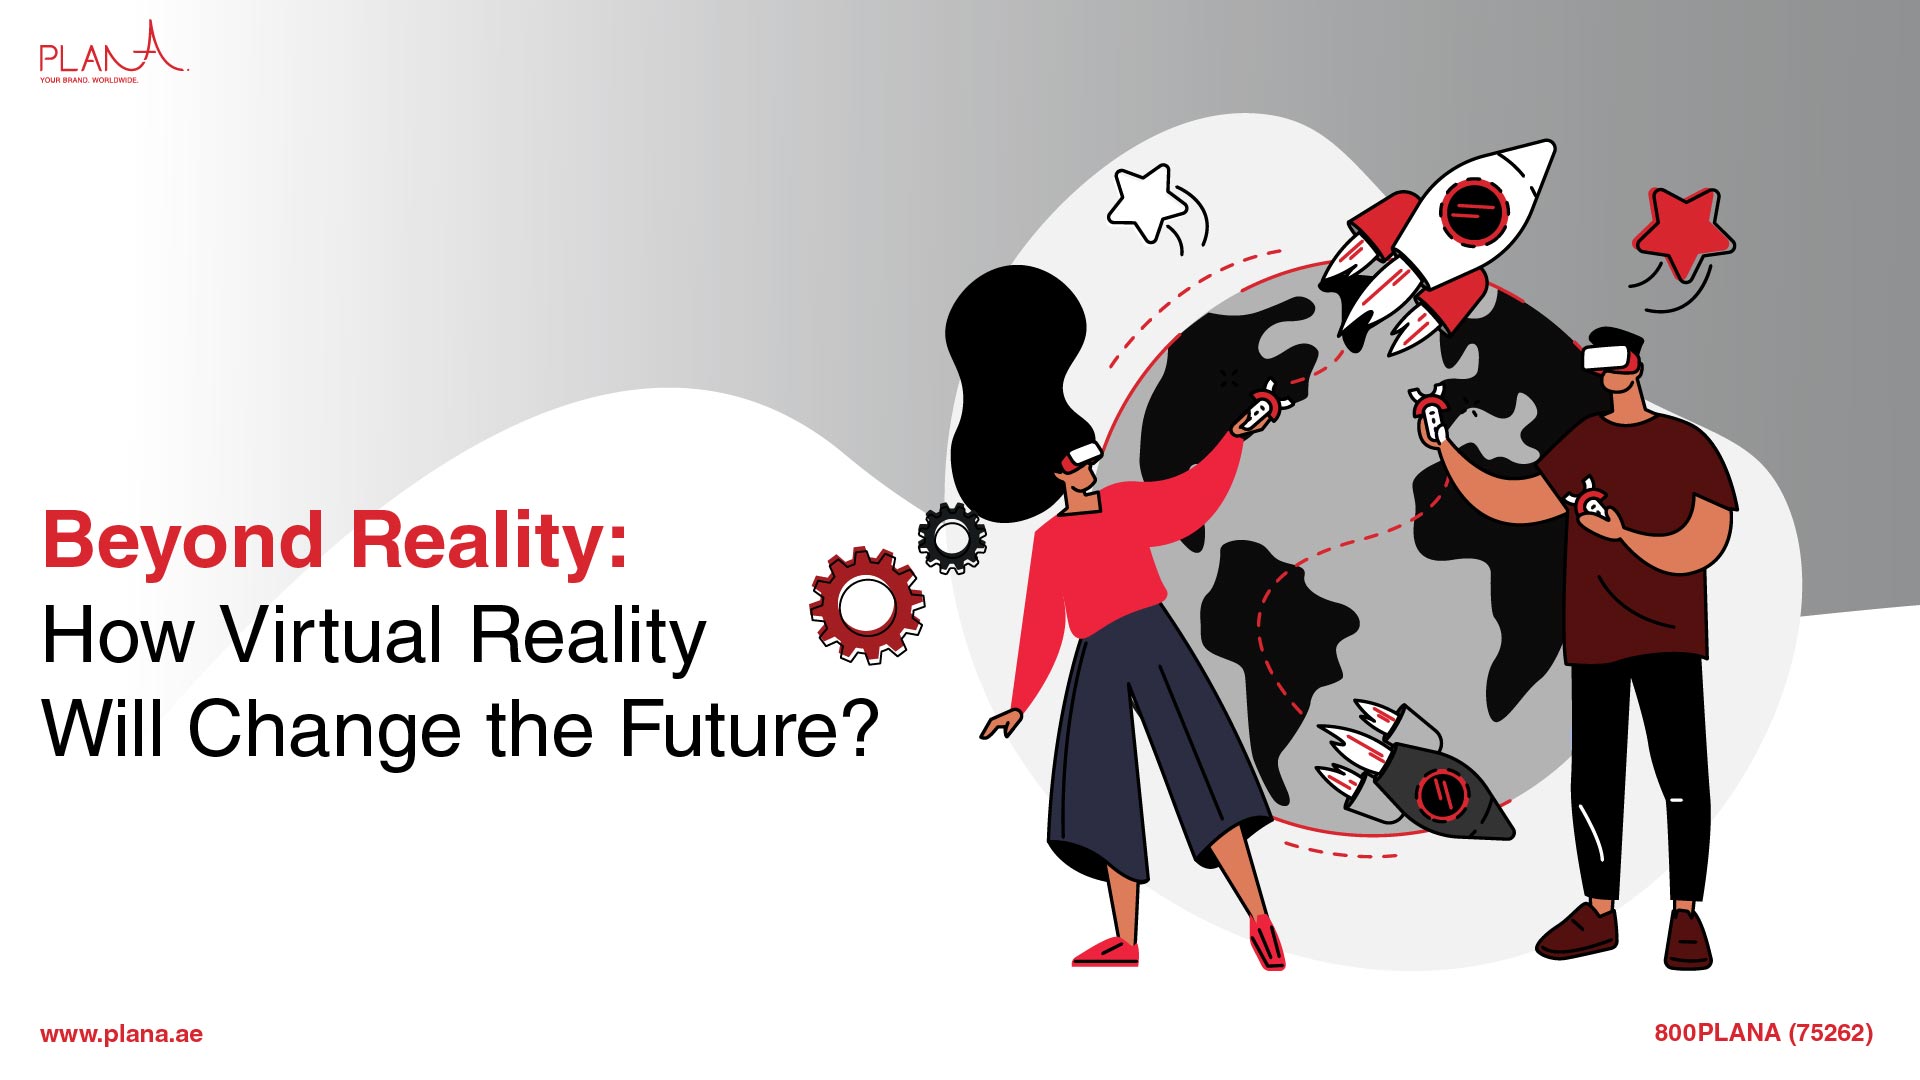 Beyond Reality: How Virtual Reality Will Change the Future?